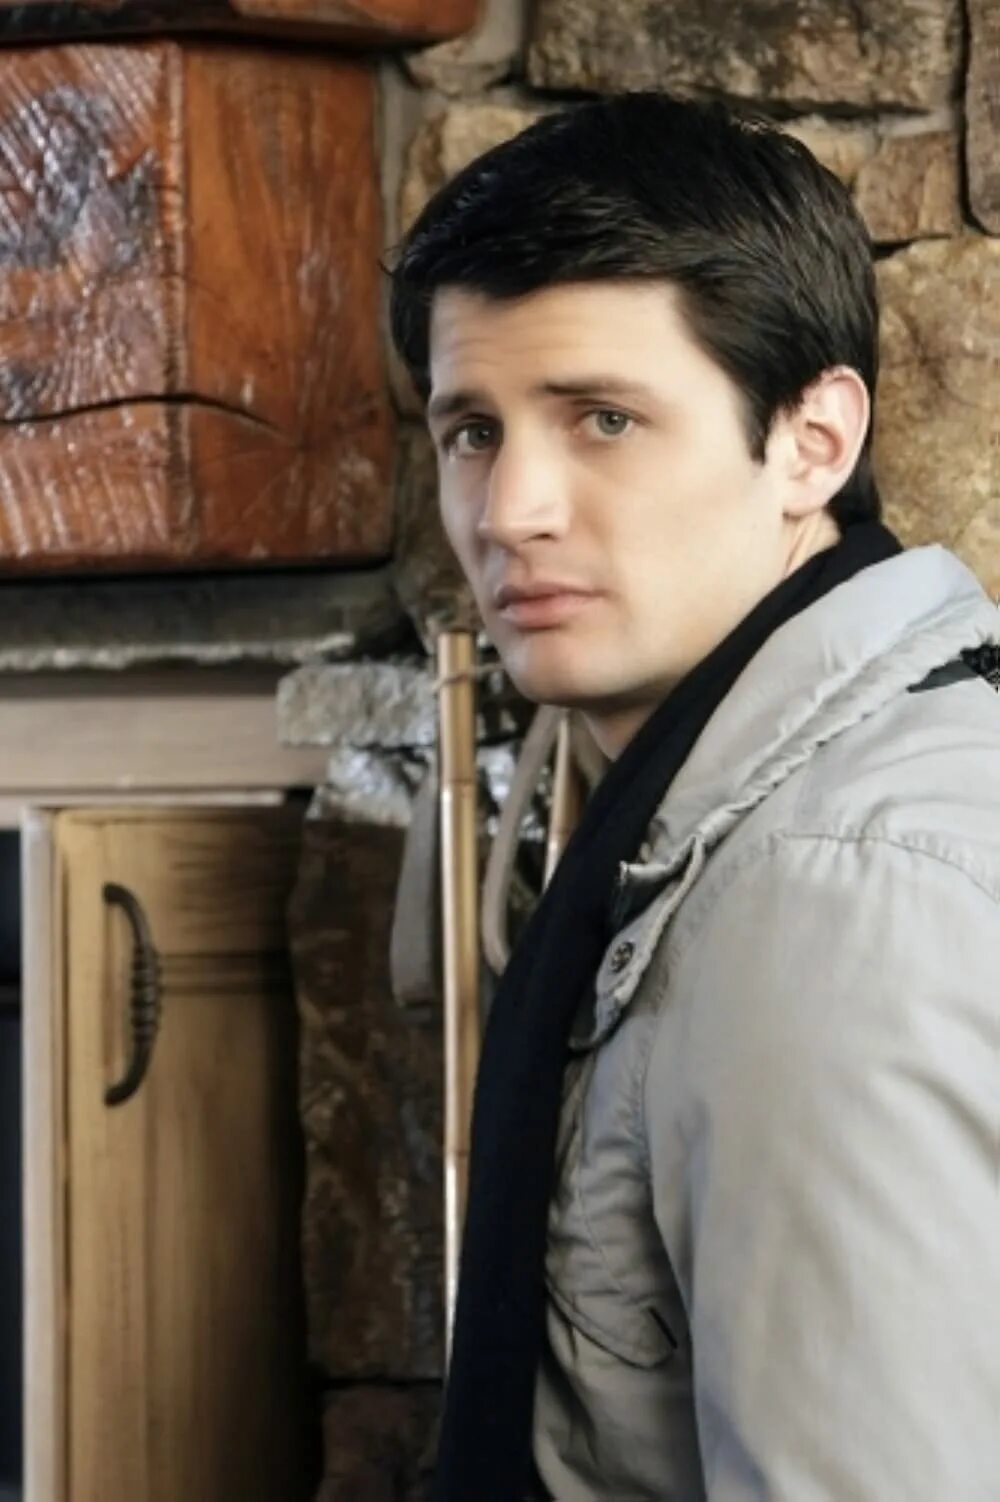 James Lafferty. Almost everything